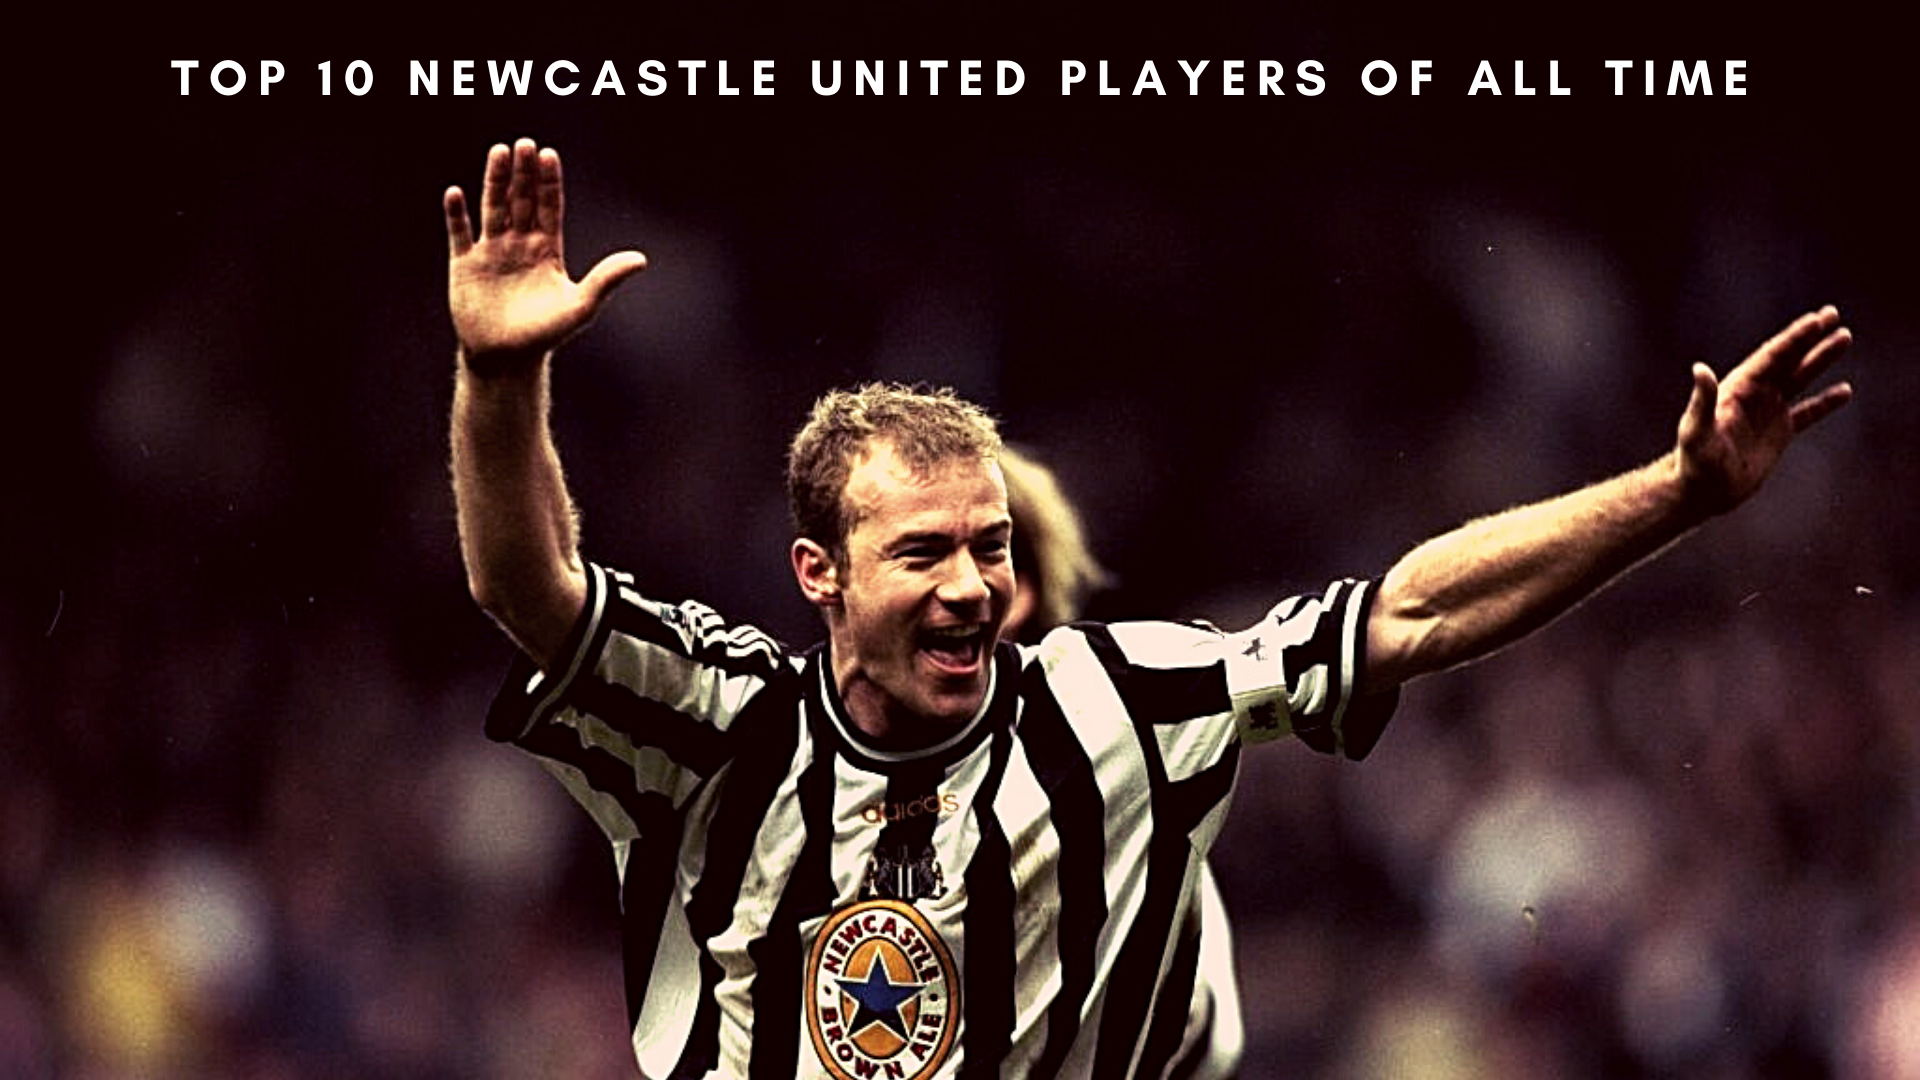 Here is a list of Top 10 Newcastle United Players of All Time. (Credit: Getty Images)